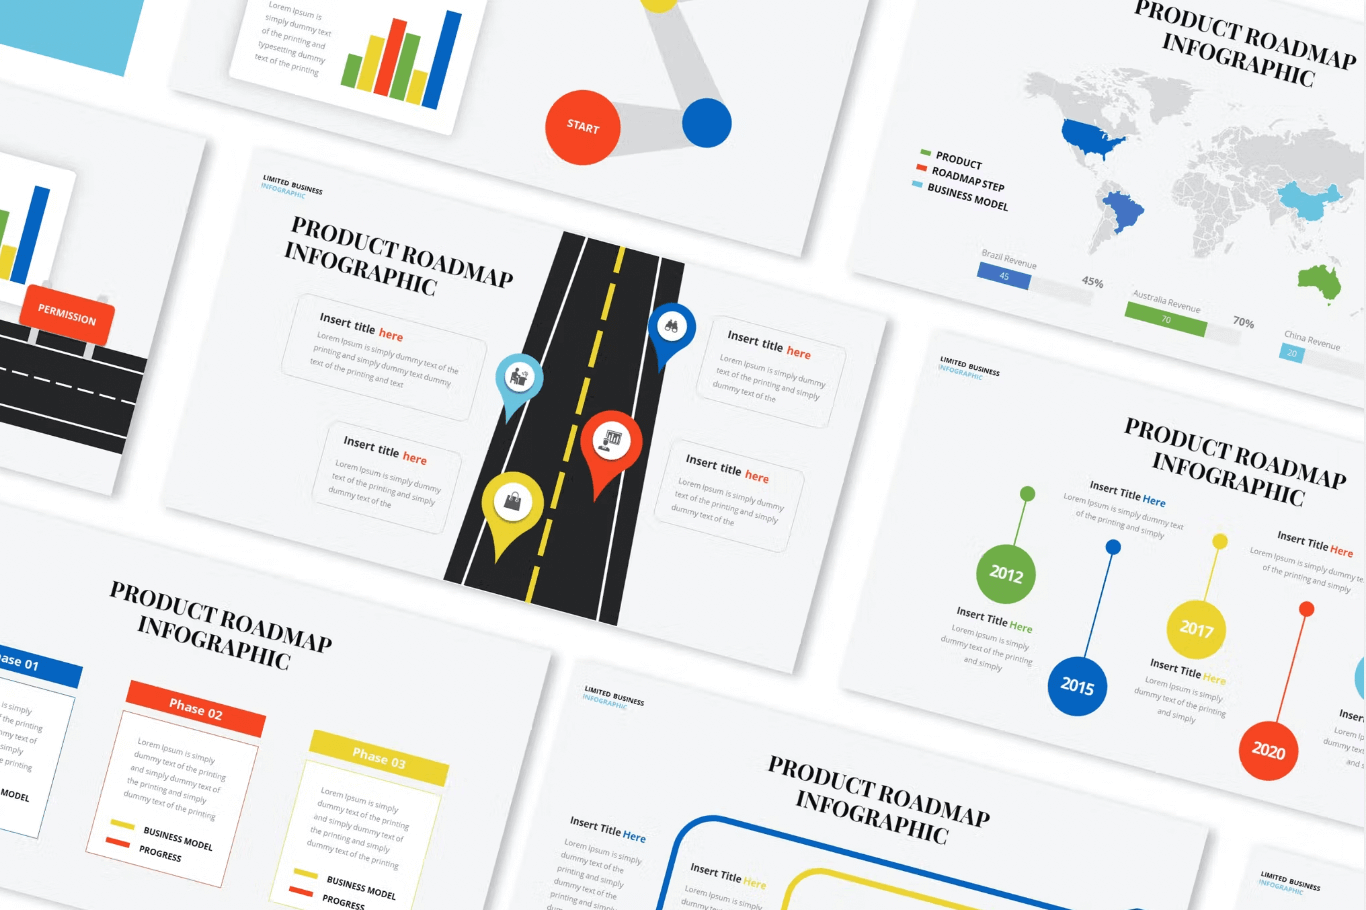 Product Roadmap Infographic Presentation Template by Formatika. 